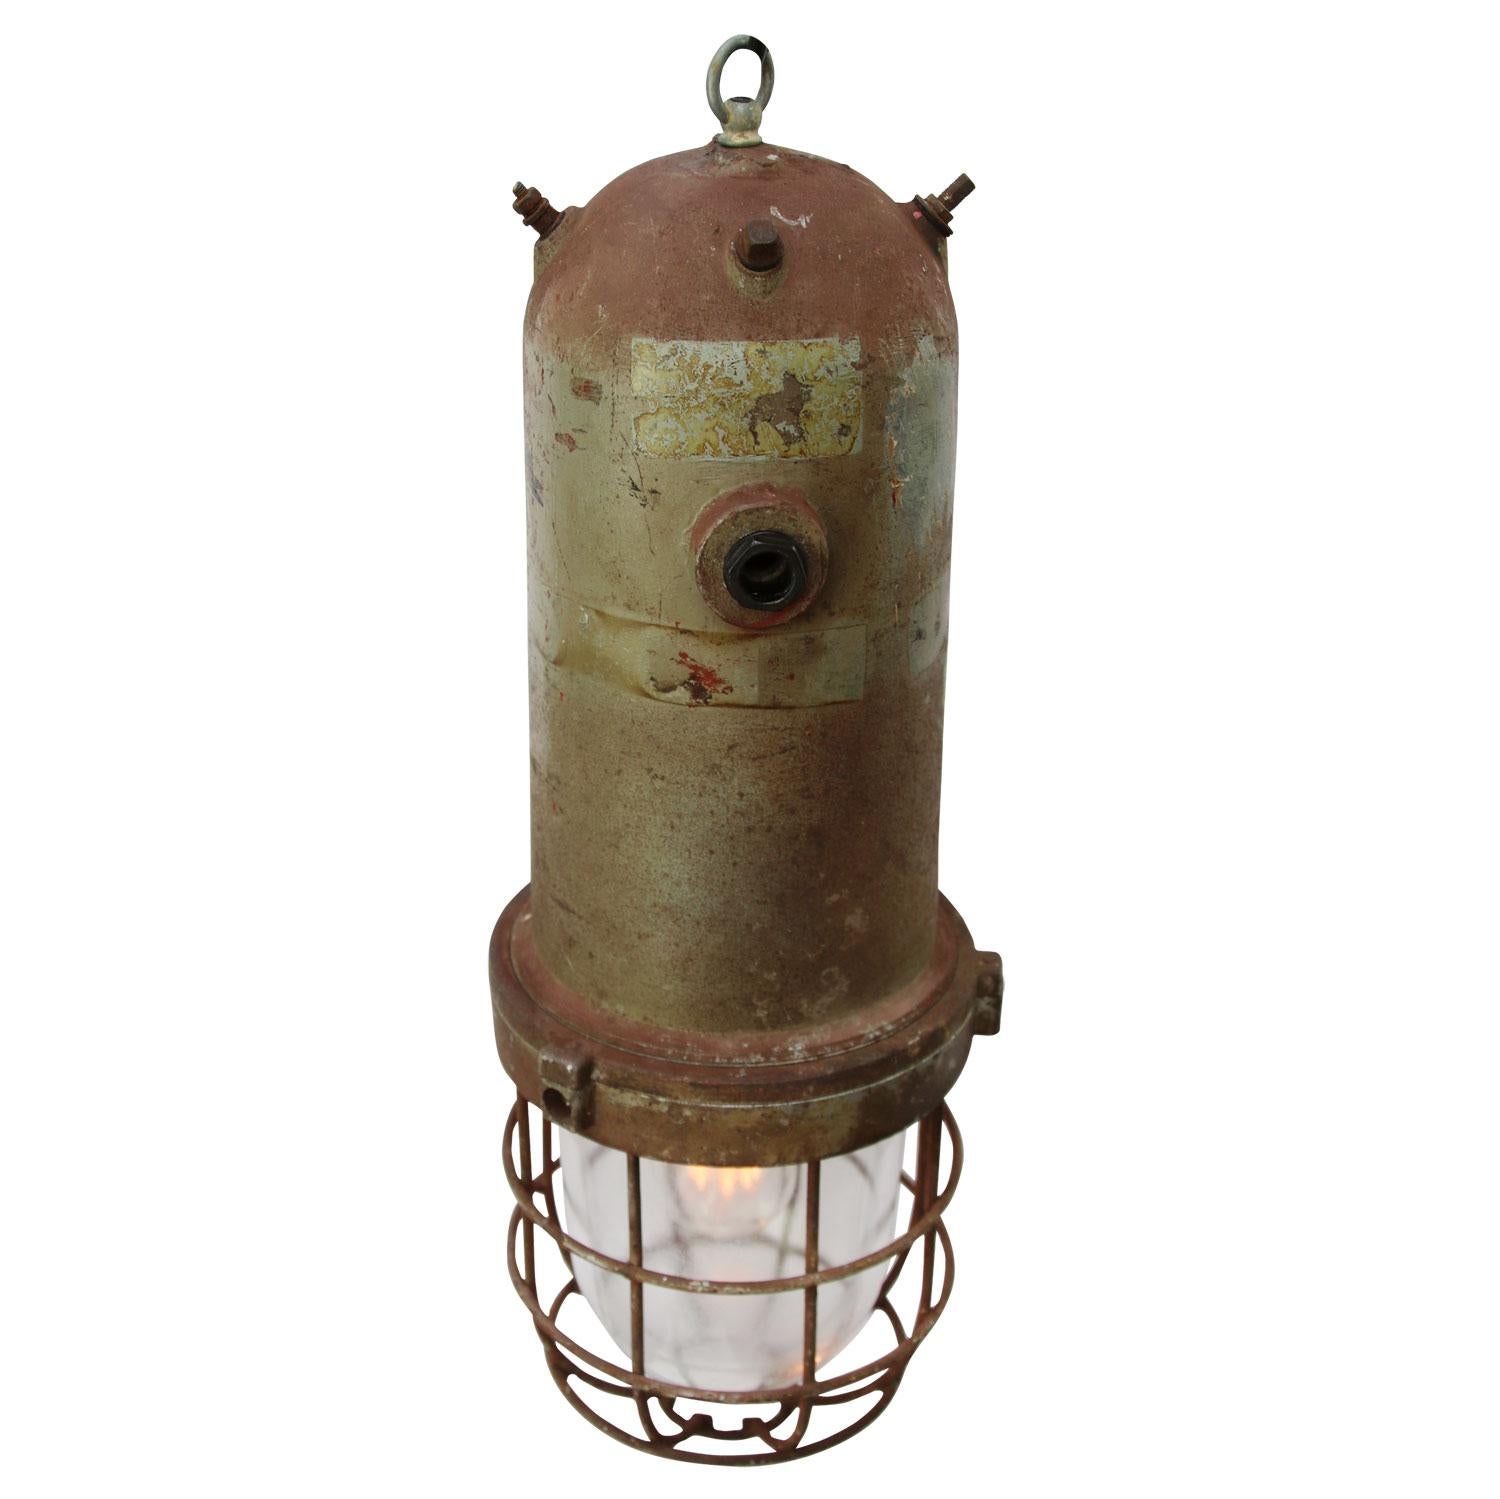 vintage European Industrial pendant
cast aluminum top, clear glass

Weight: 6.60 kg / 14.6 lb

Priced per individual item. All lamps have been made suitable by international standards for incandescent light bulbs, energy-efficient and LED